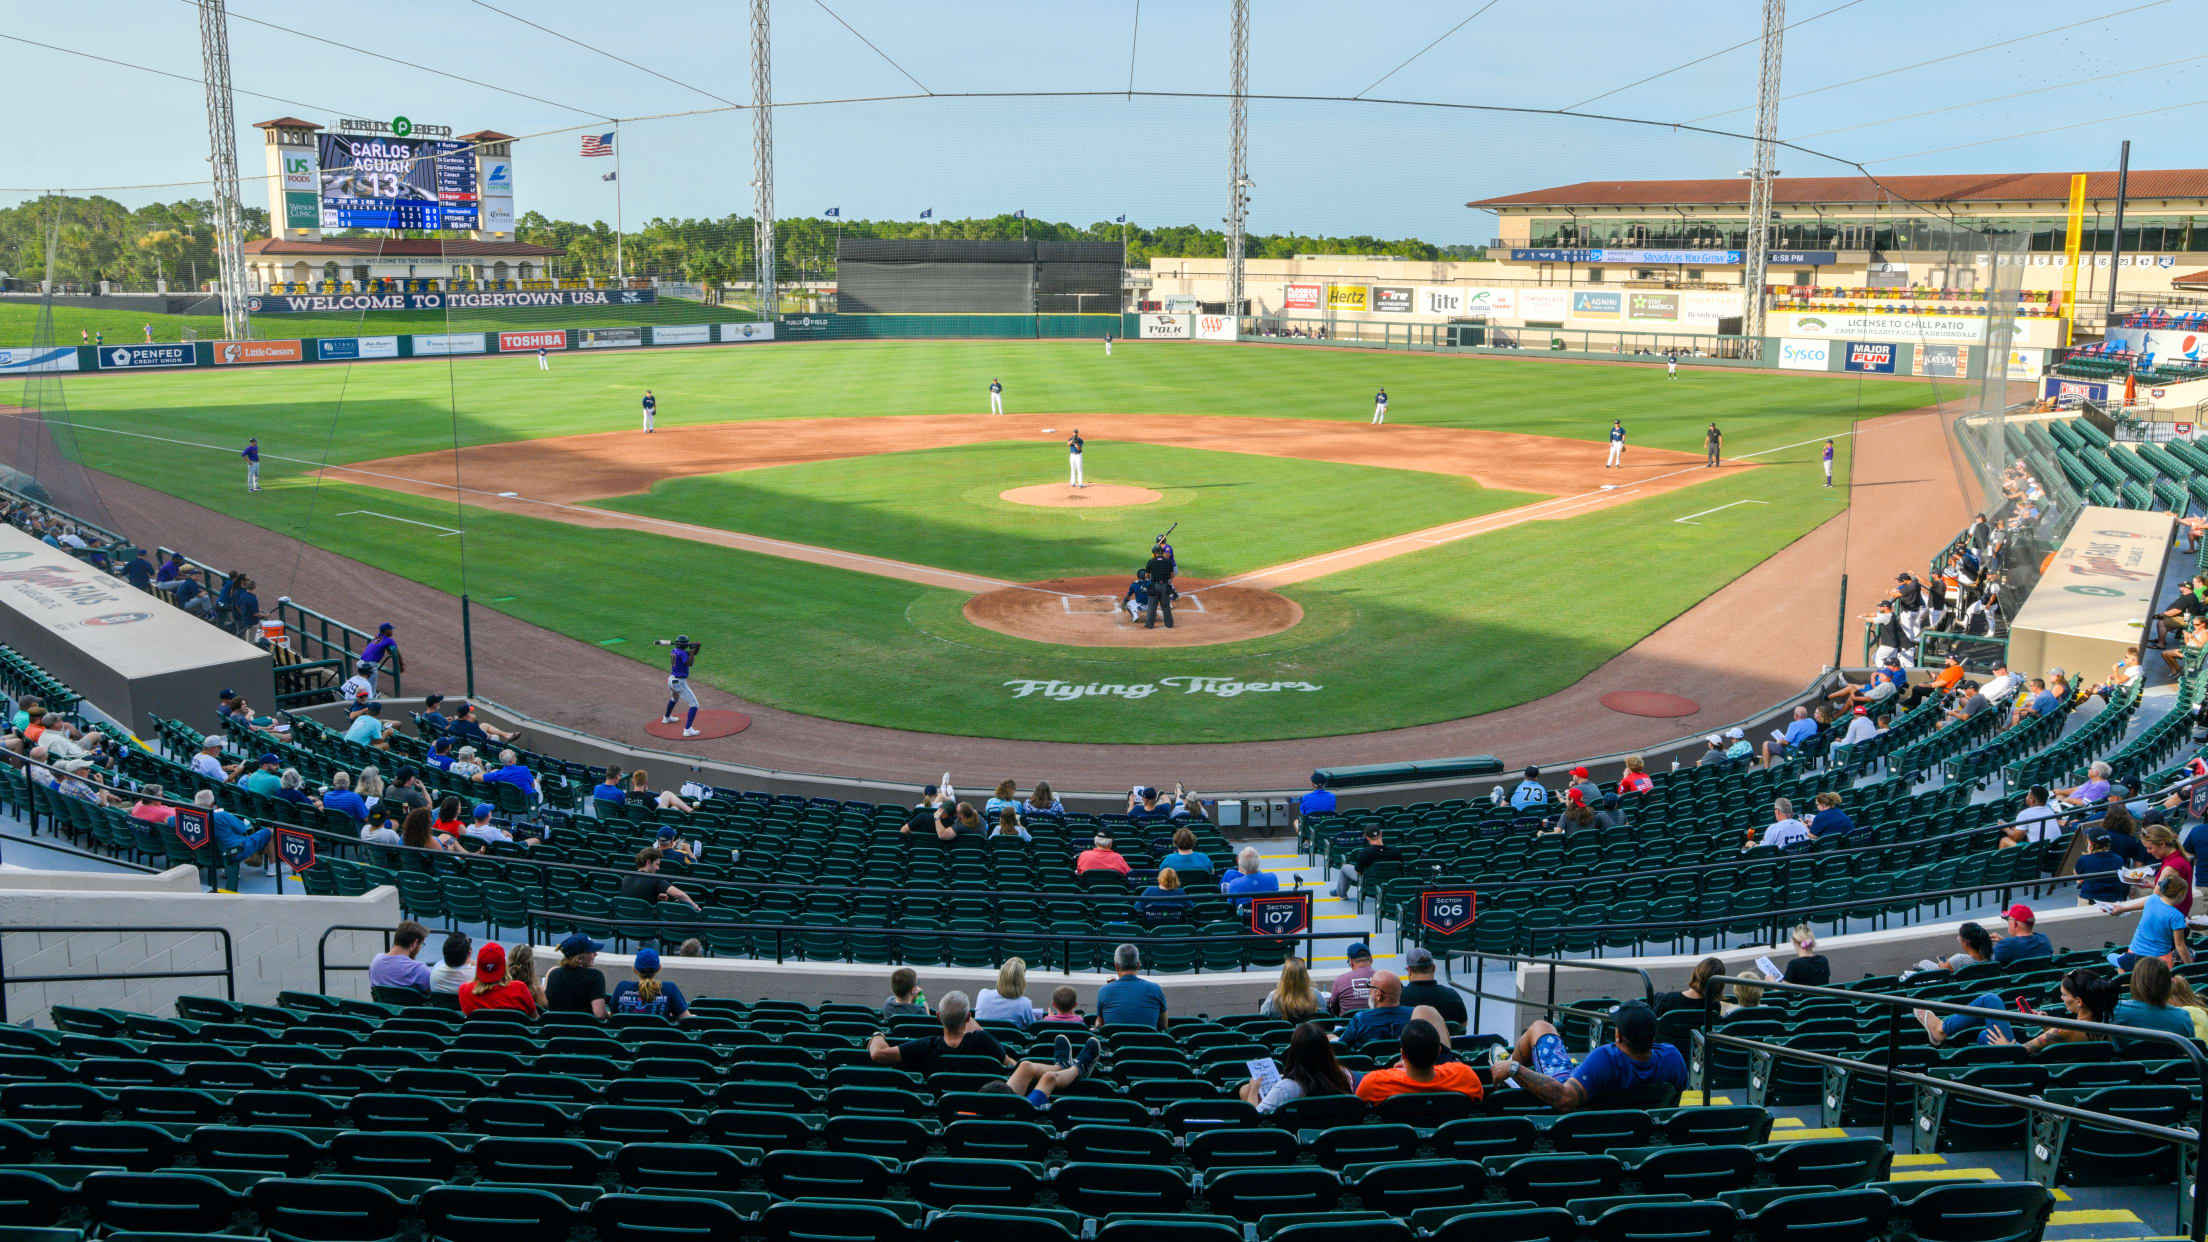 Lakeland's 'historic but modern' spring training home of the Detroit Tigers